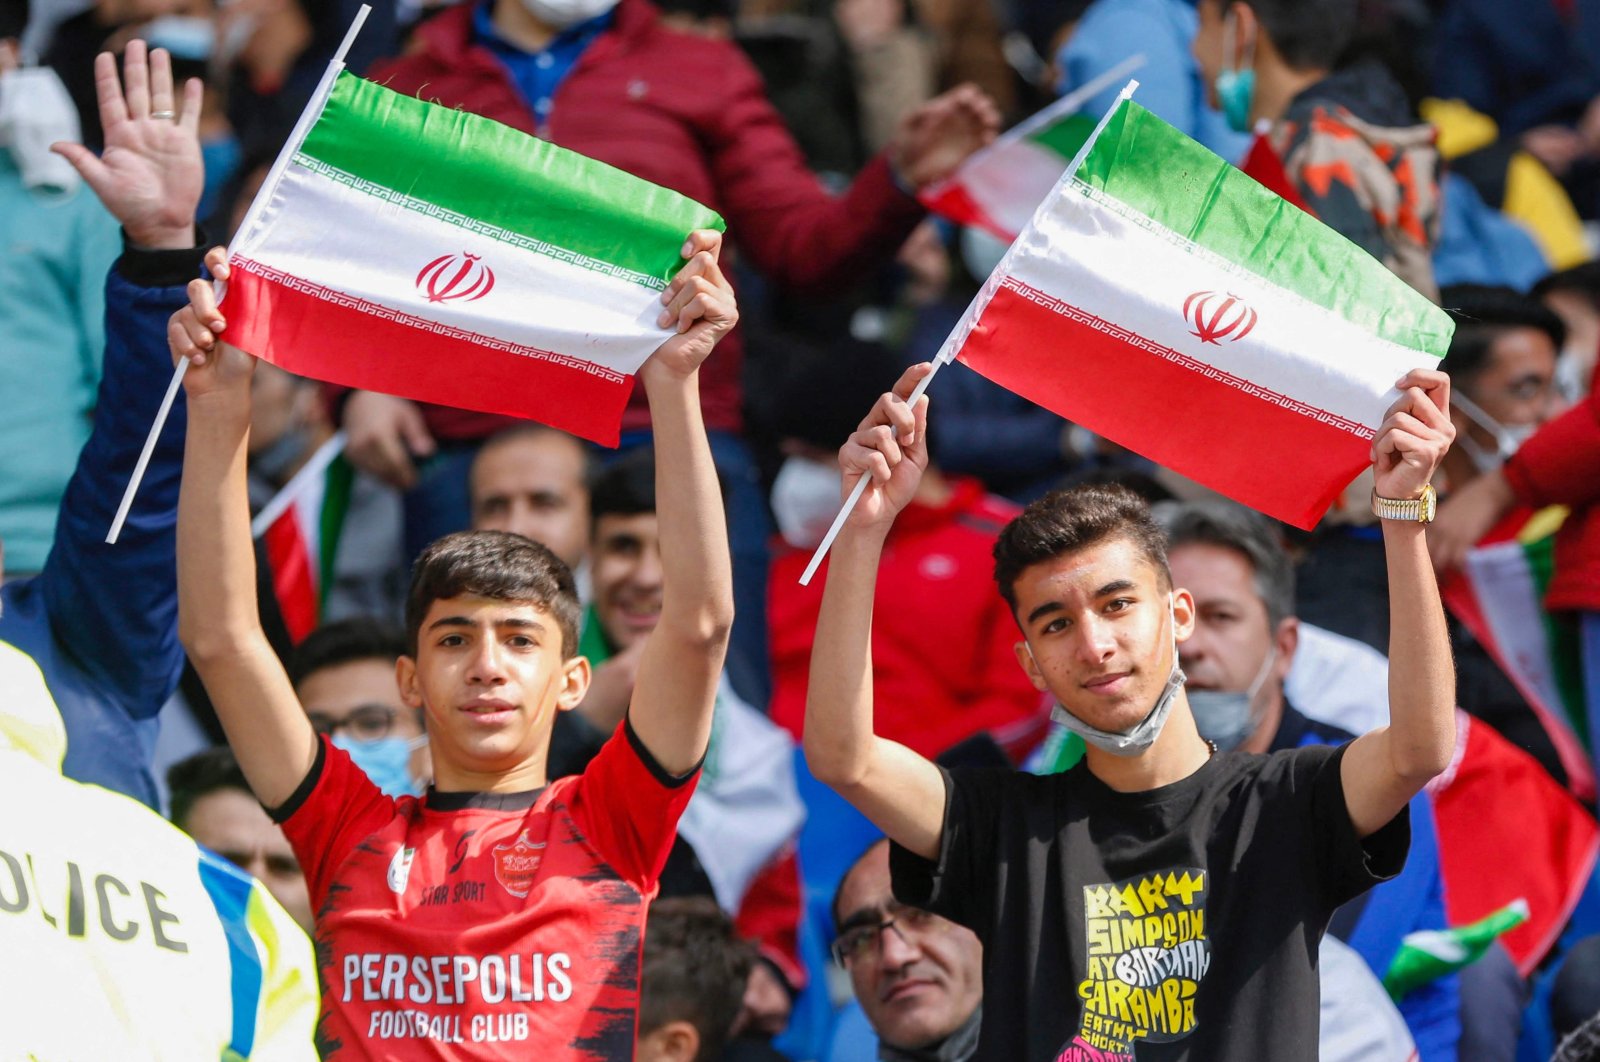 Iran supporters wave the national flag during the 2022 Qatar World Cup Asian Qualifiers football match against Lebanon, Mashhad, Iran, March 29, 2022. (AFP Photo)